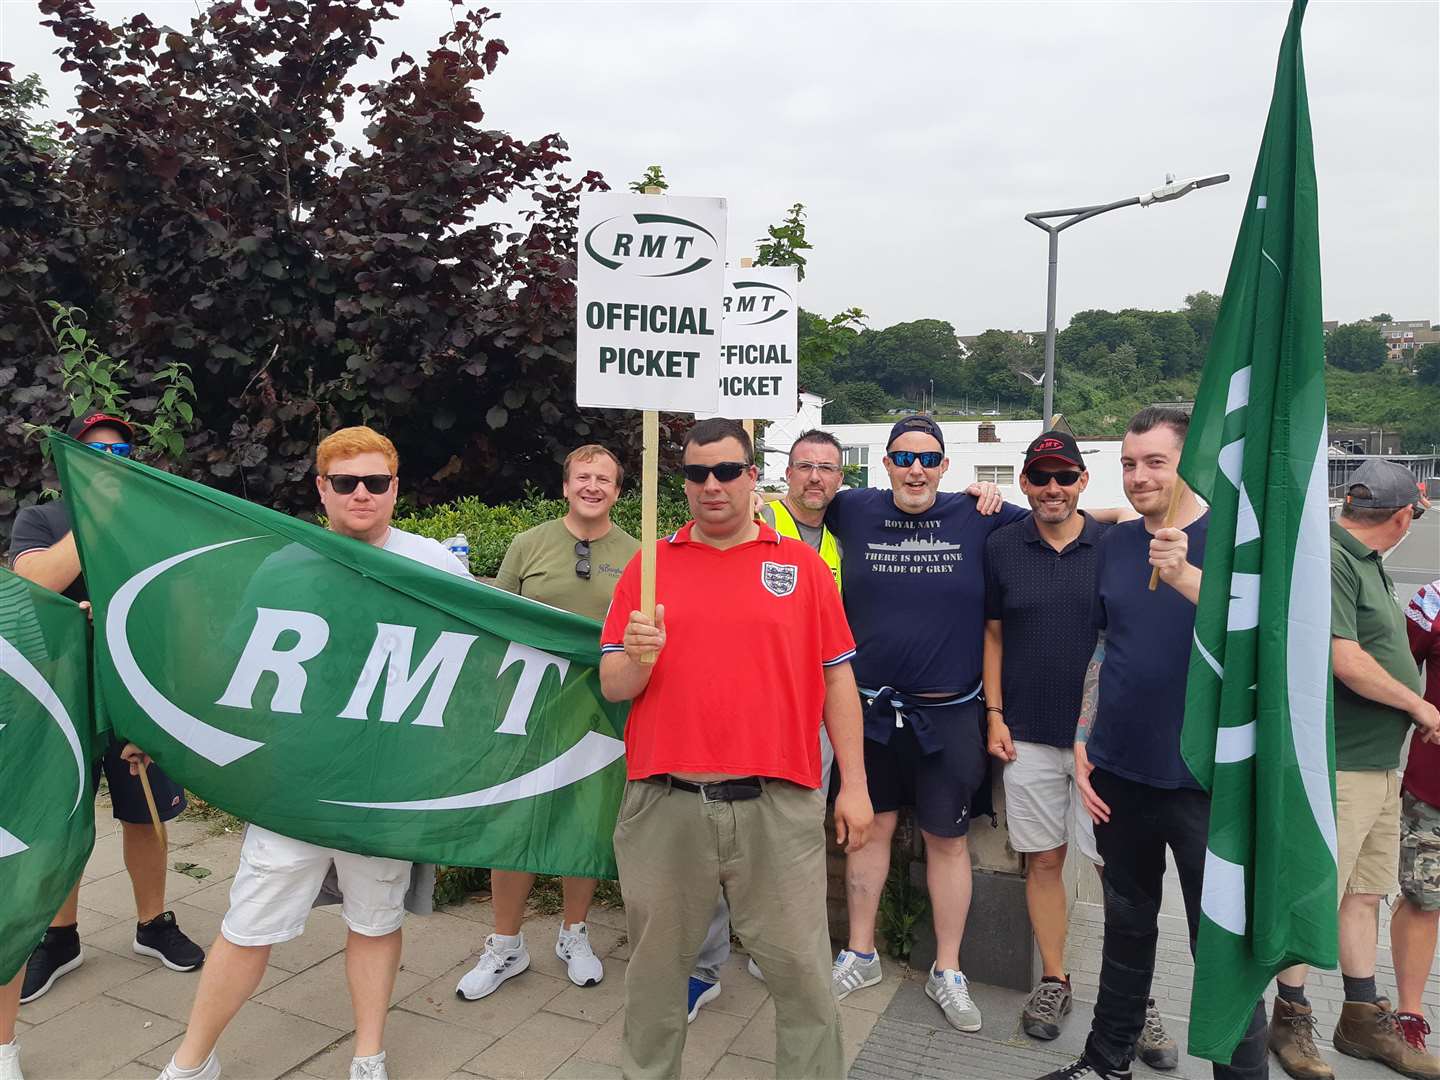 The picket line at Dover Priory Railway Station